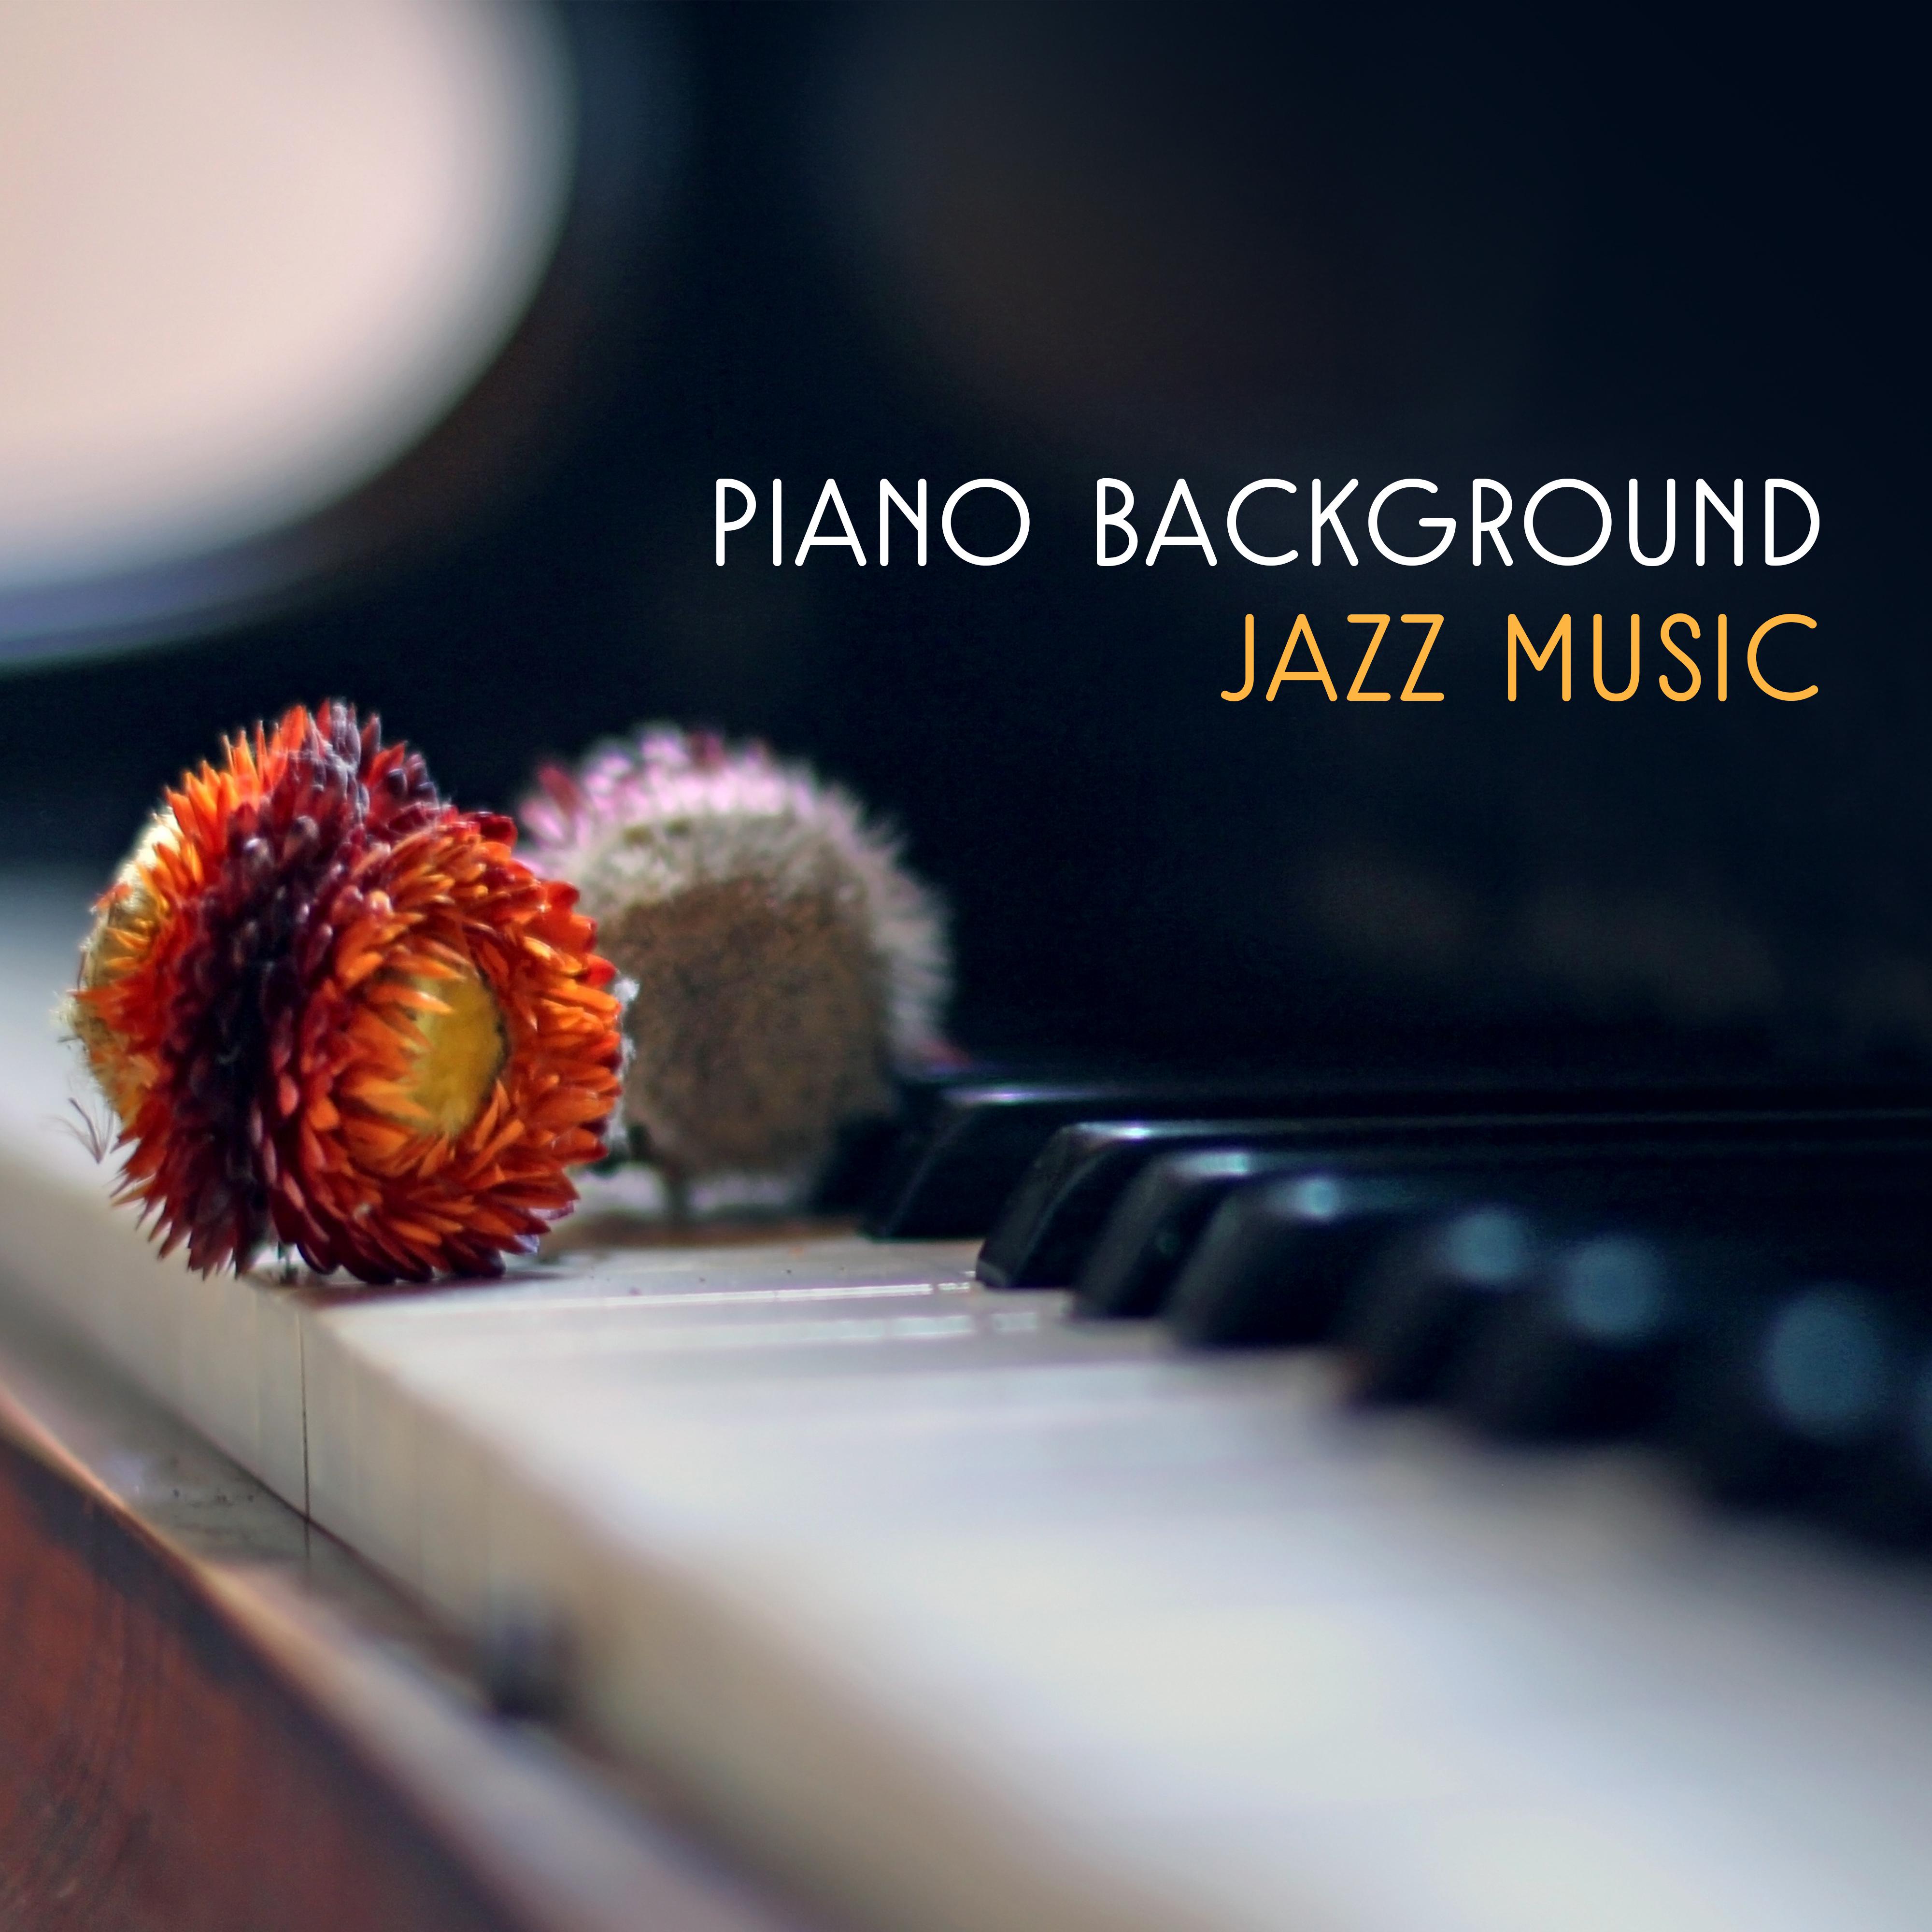 Piano Background Jazz Music – Soft Jazz to Relax, Peaceful Songs to Rest, Mellow Music, Shades of Jazz